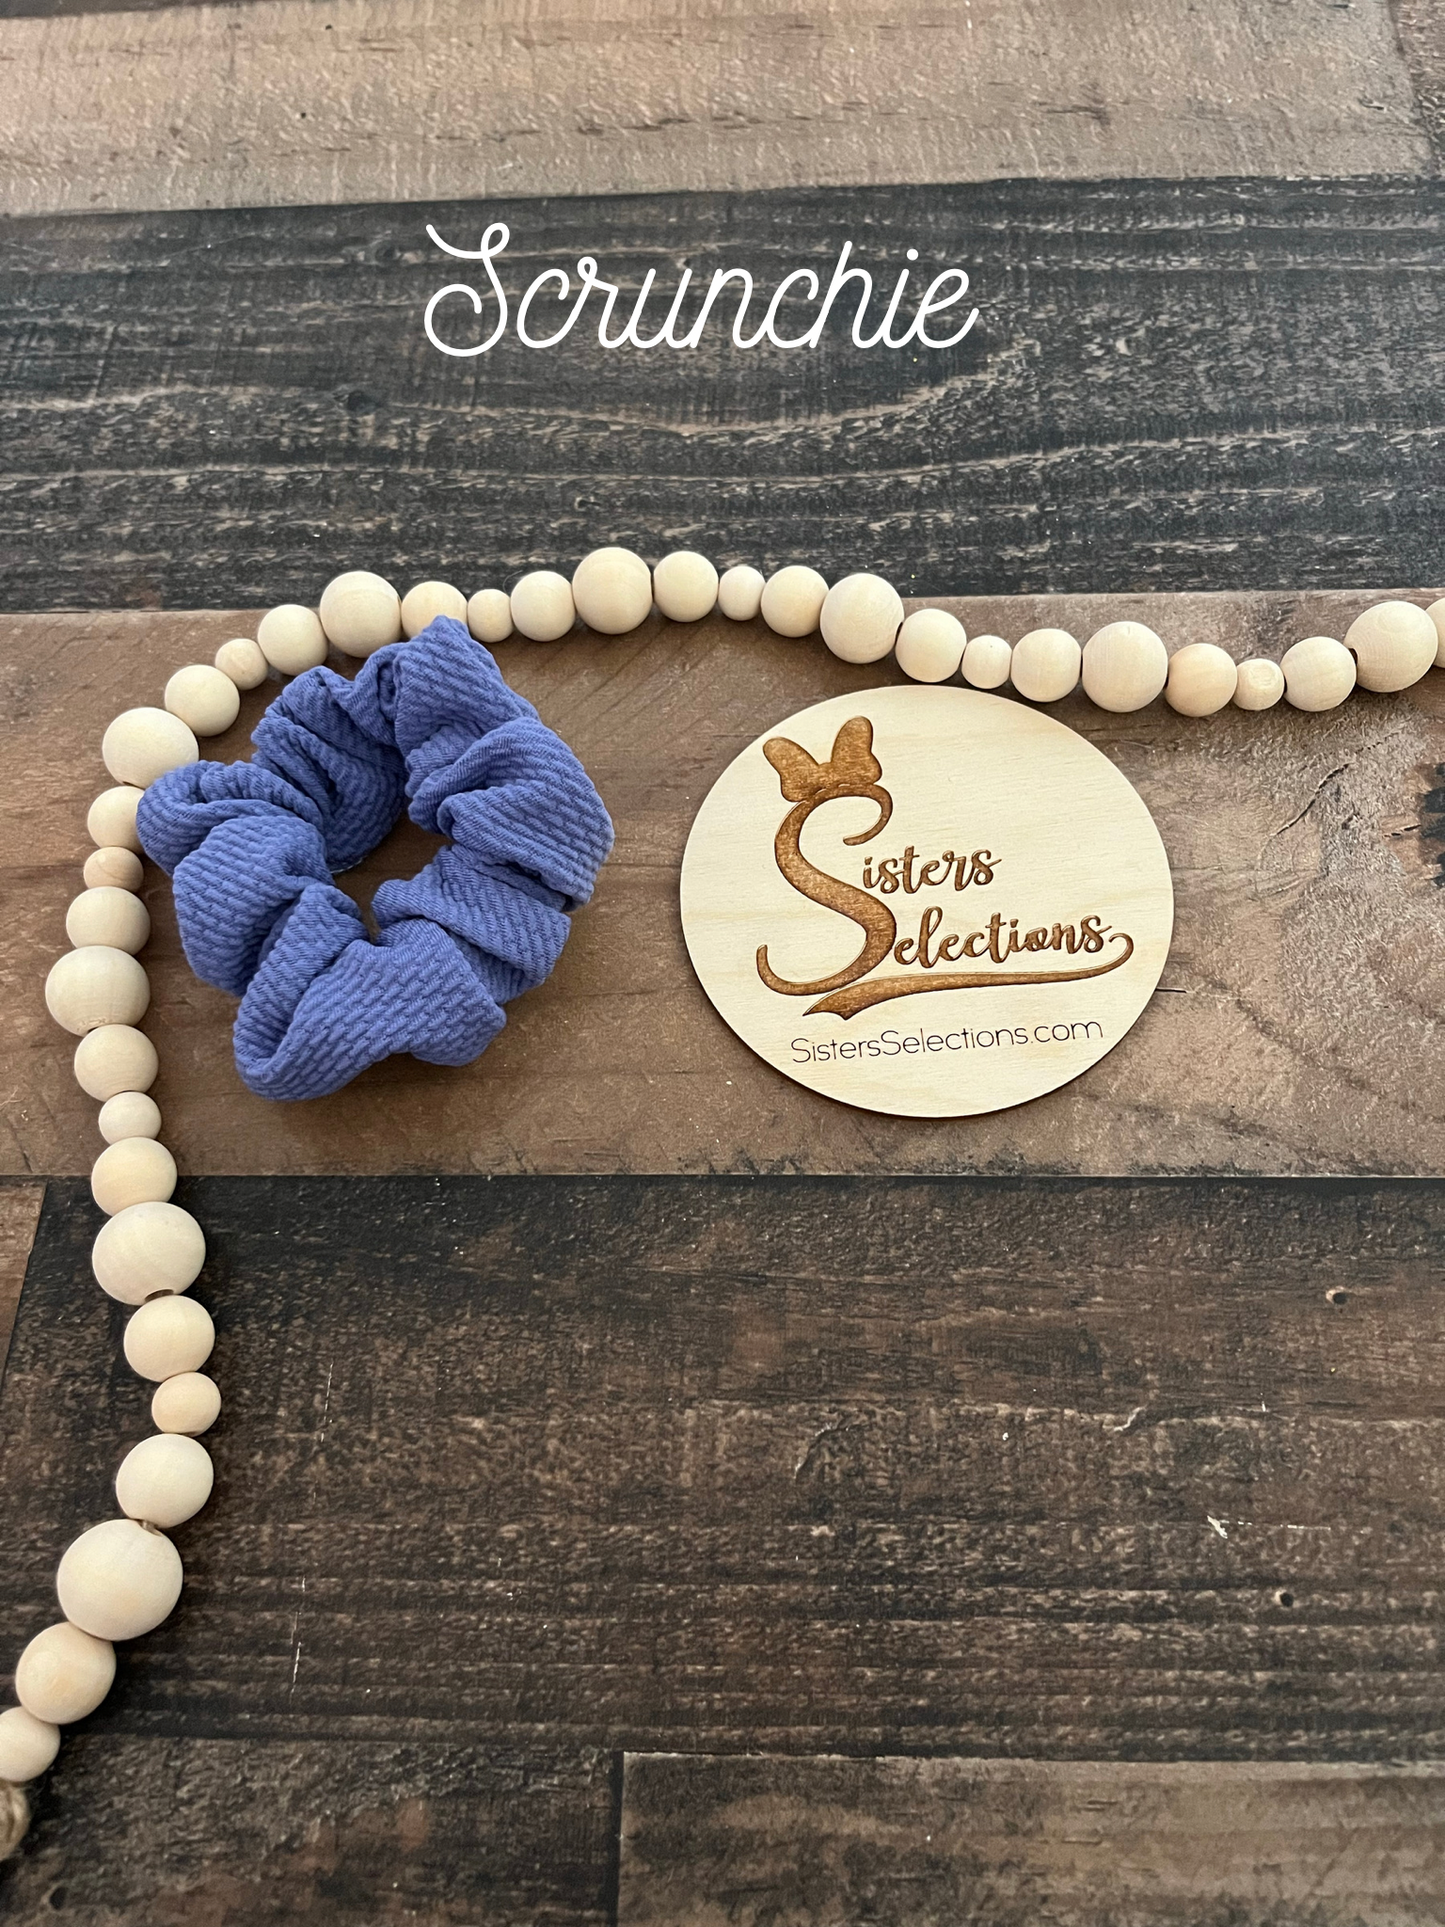 Scrunchie Ships in 1-3 business days